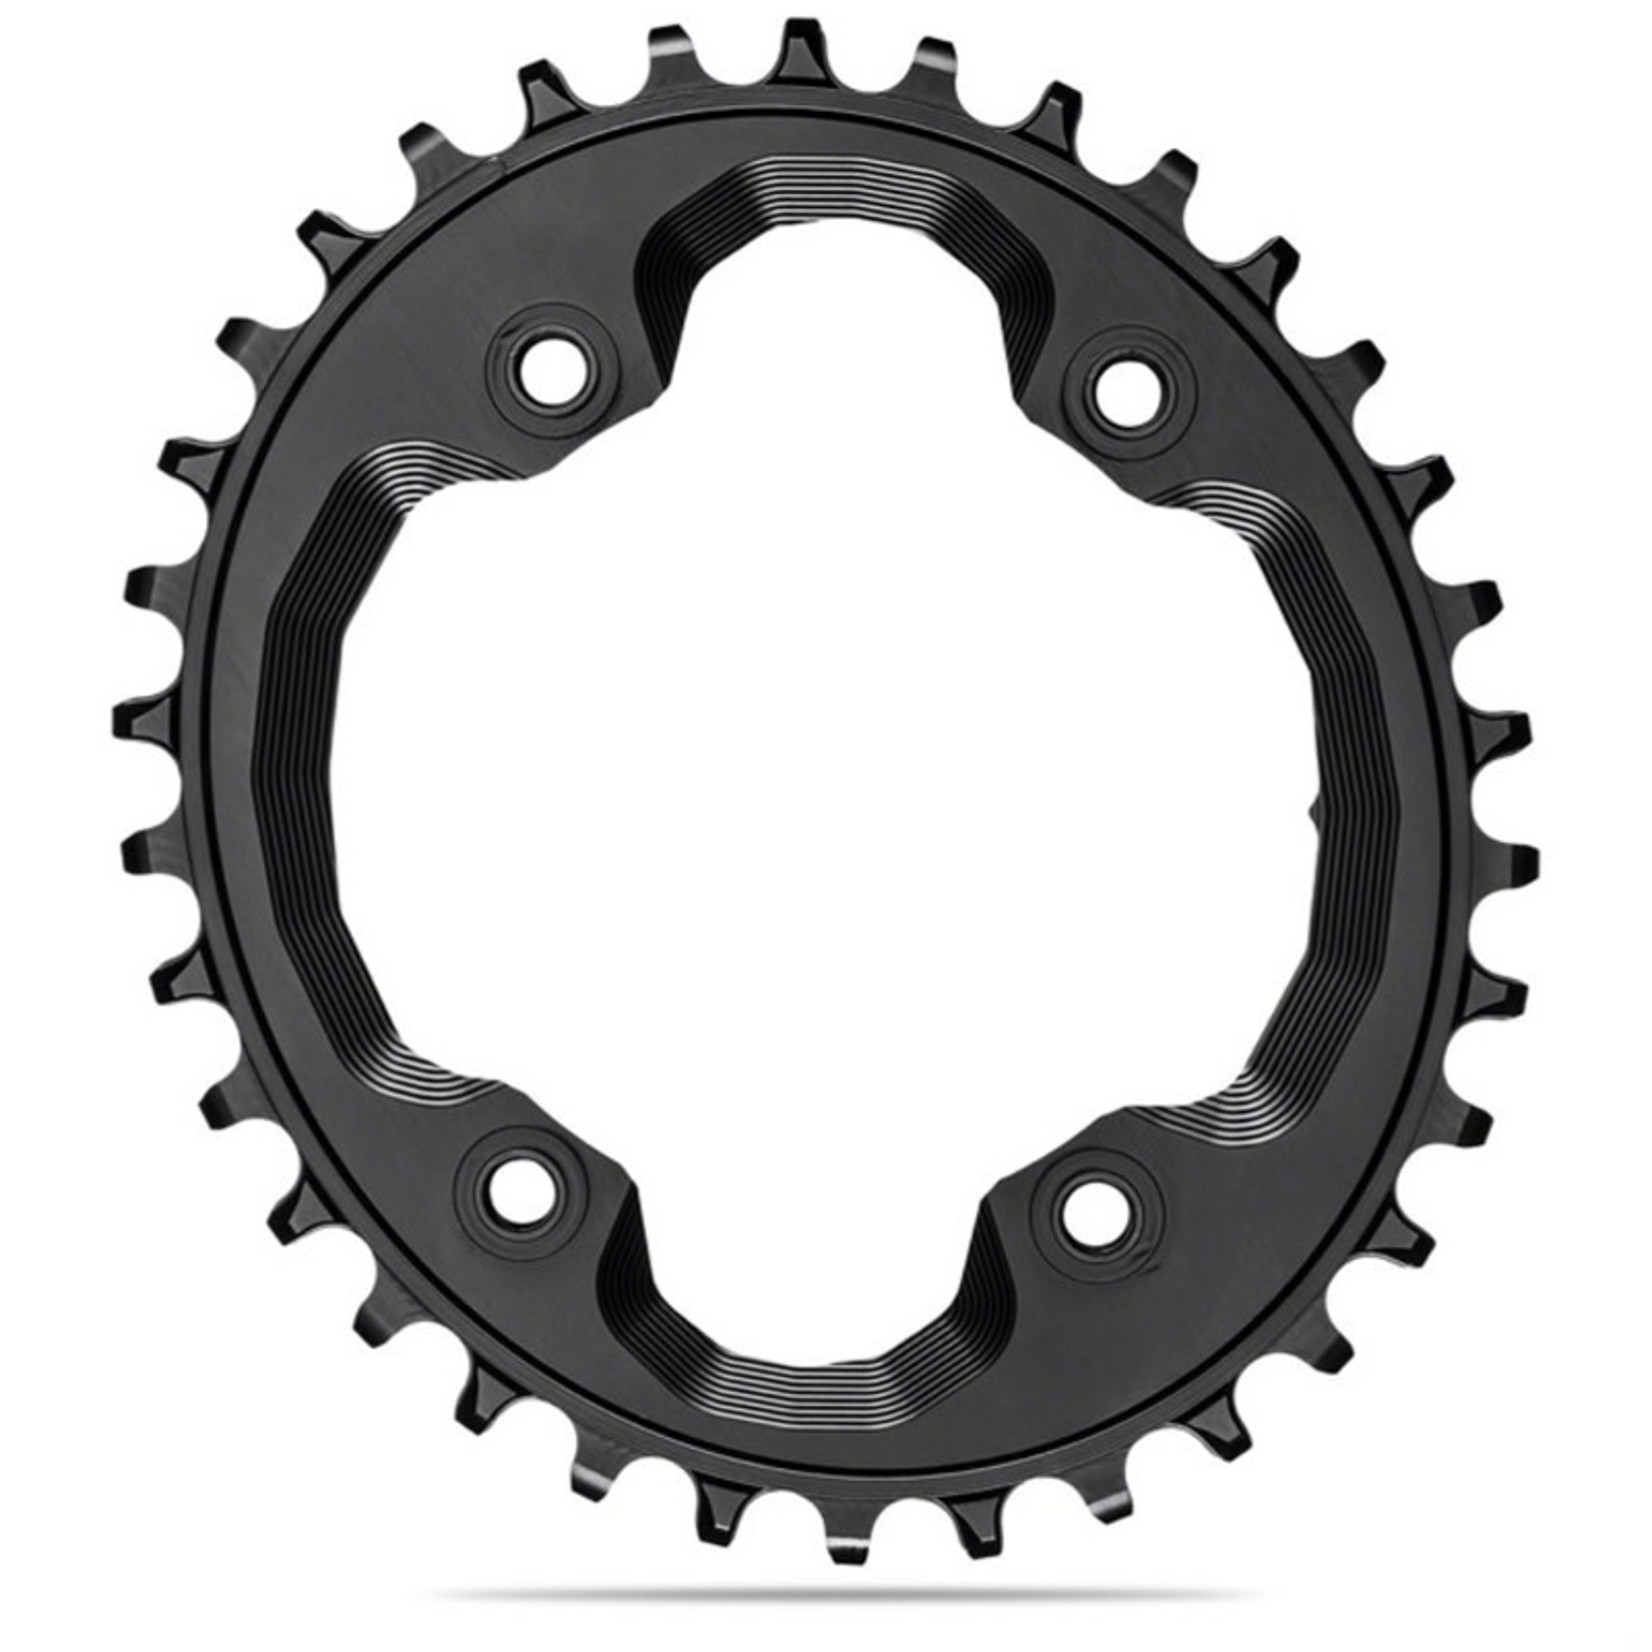 Absolute Black Chainring OVAL 96mm 34T 4B BK